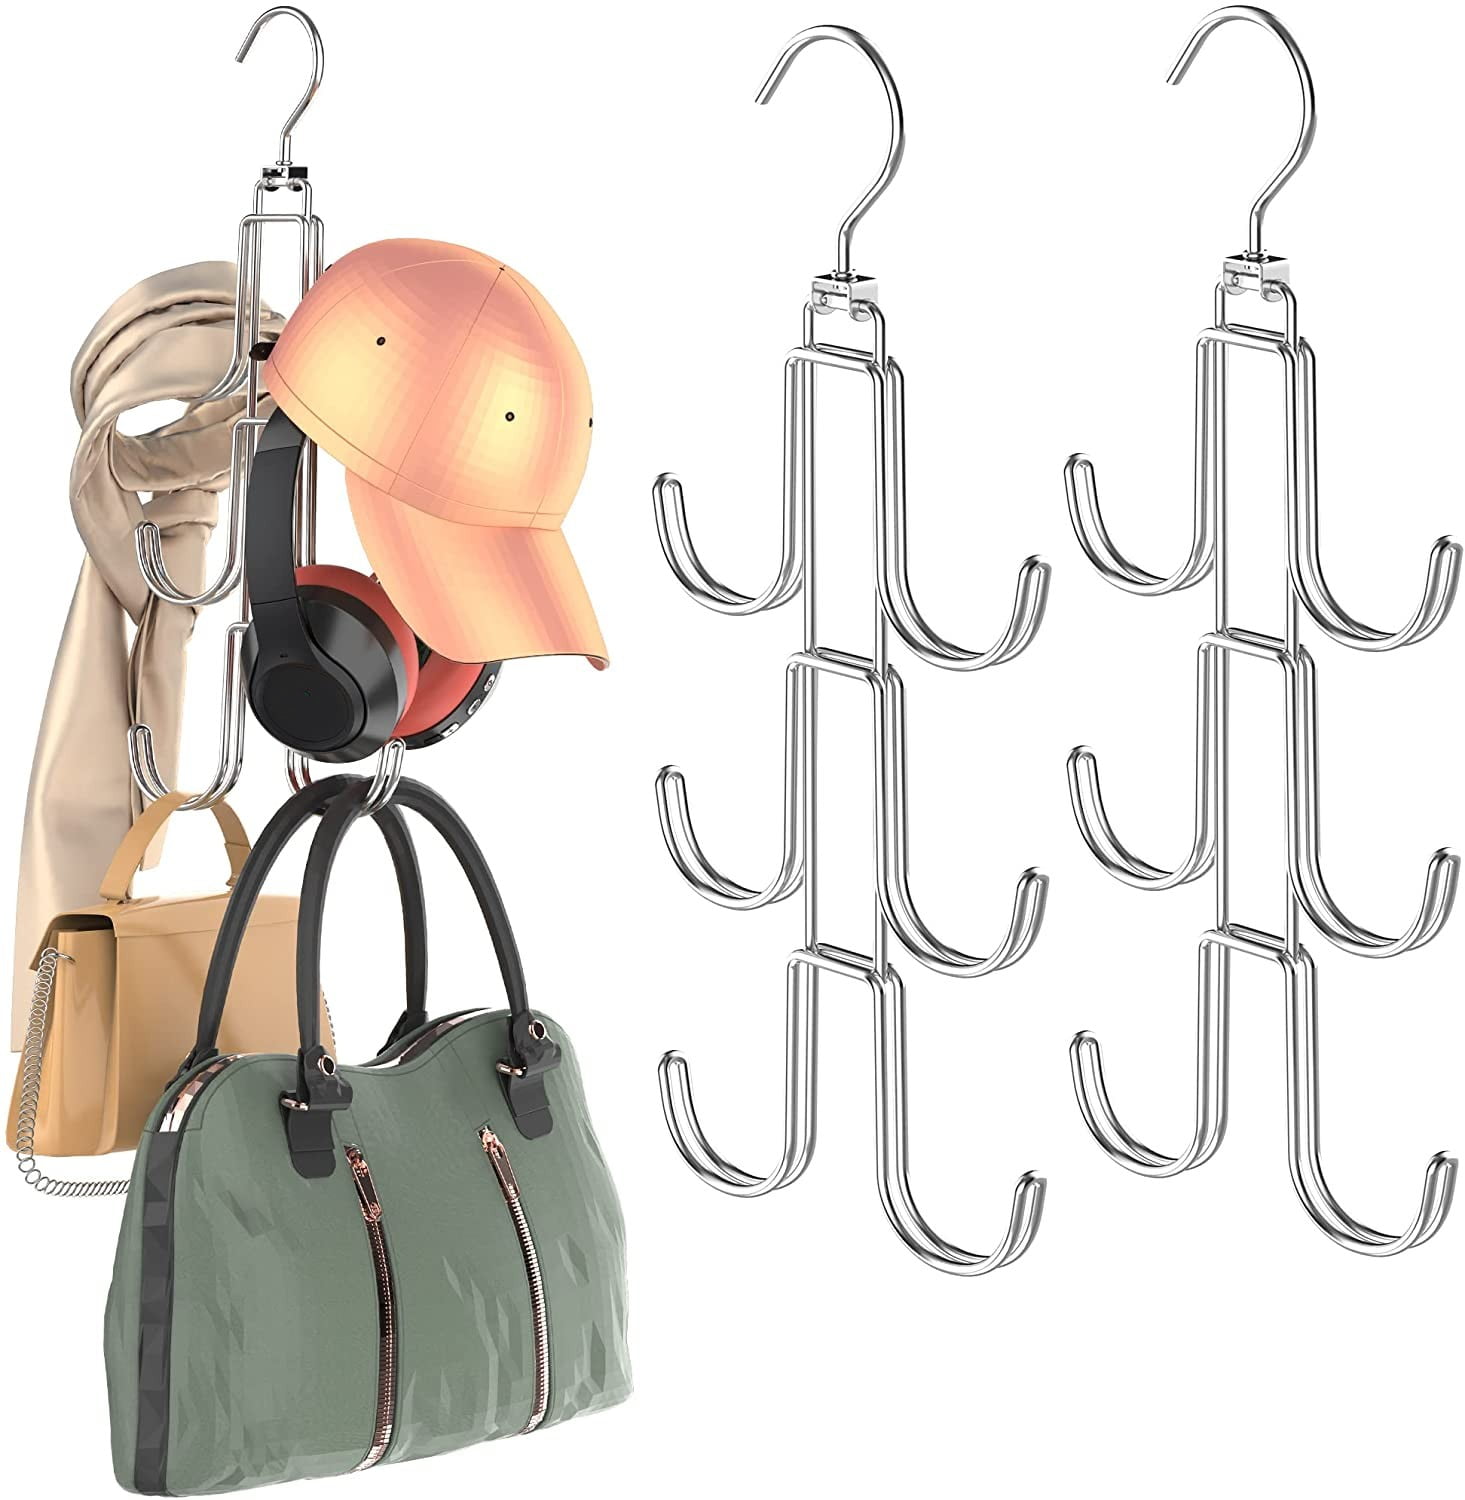 Cut Down on Closet Clutter With This Versatile $7 Purse Hanger